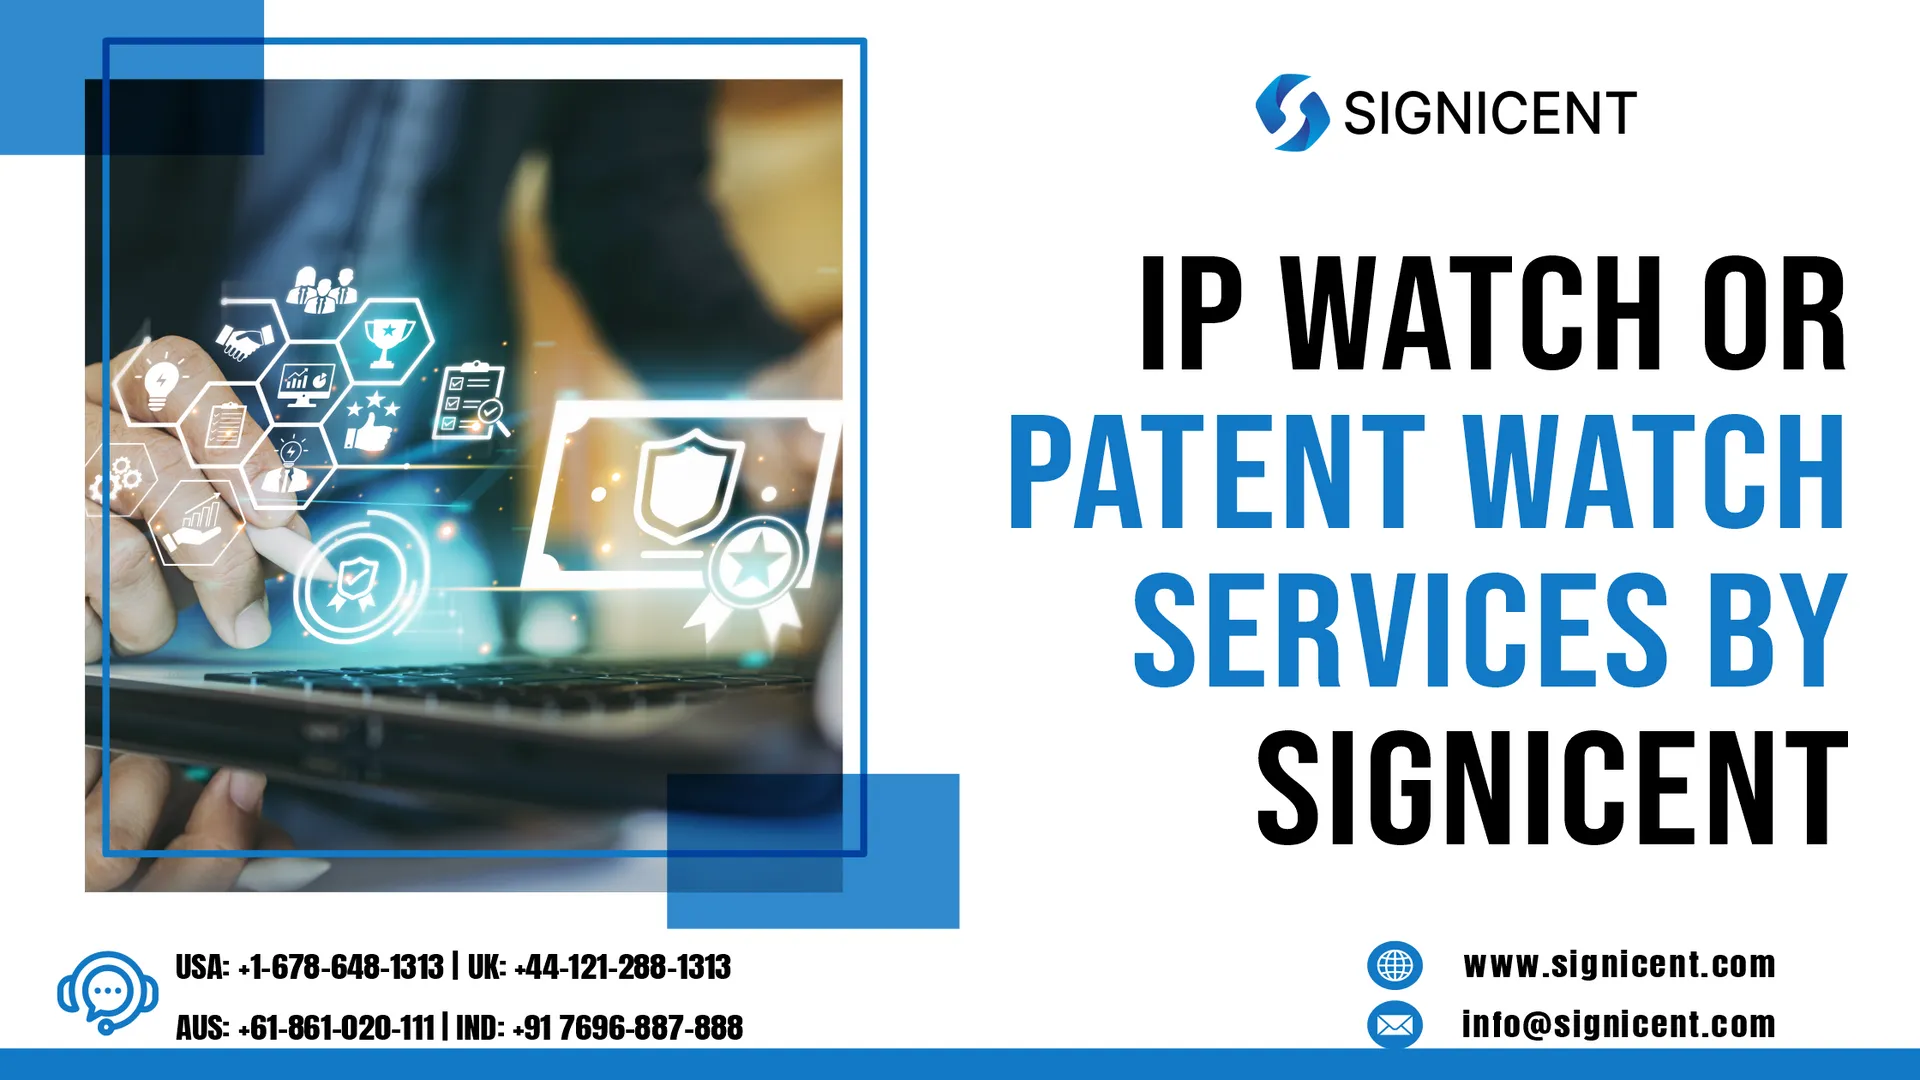 Top IP Watch or Patent Watch Services - Signicent LLP

https://signicent.com/ip-watch-or-patent-watch/

Signicent offers expert IP Watch and Patent Watch services to safeguard your innovation and competitive edge. Our comprehensive monitoring solutions meticulously track patent activity, competitor filings, and emerging trends within your industry. With Signicent, you gain invaluable insights to inform your IP strategy, identify opportunities, and mitigate risks. Stay ahead in the innovation game with our tailored IP Watch and Patent Watch services, empowering your organization to protect, prosper, and pioneer in today's dynamic market.